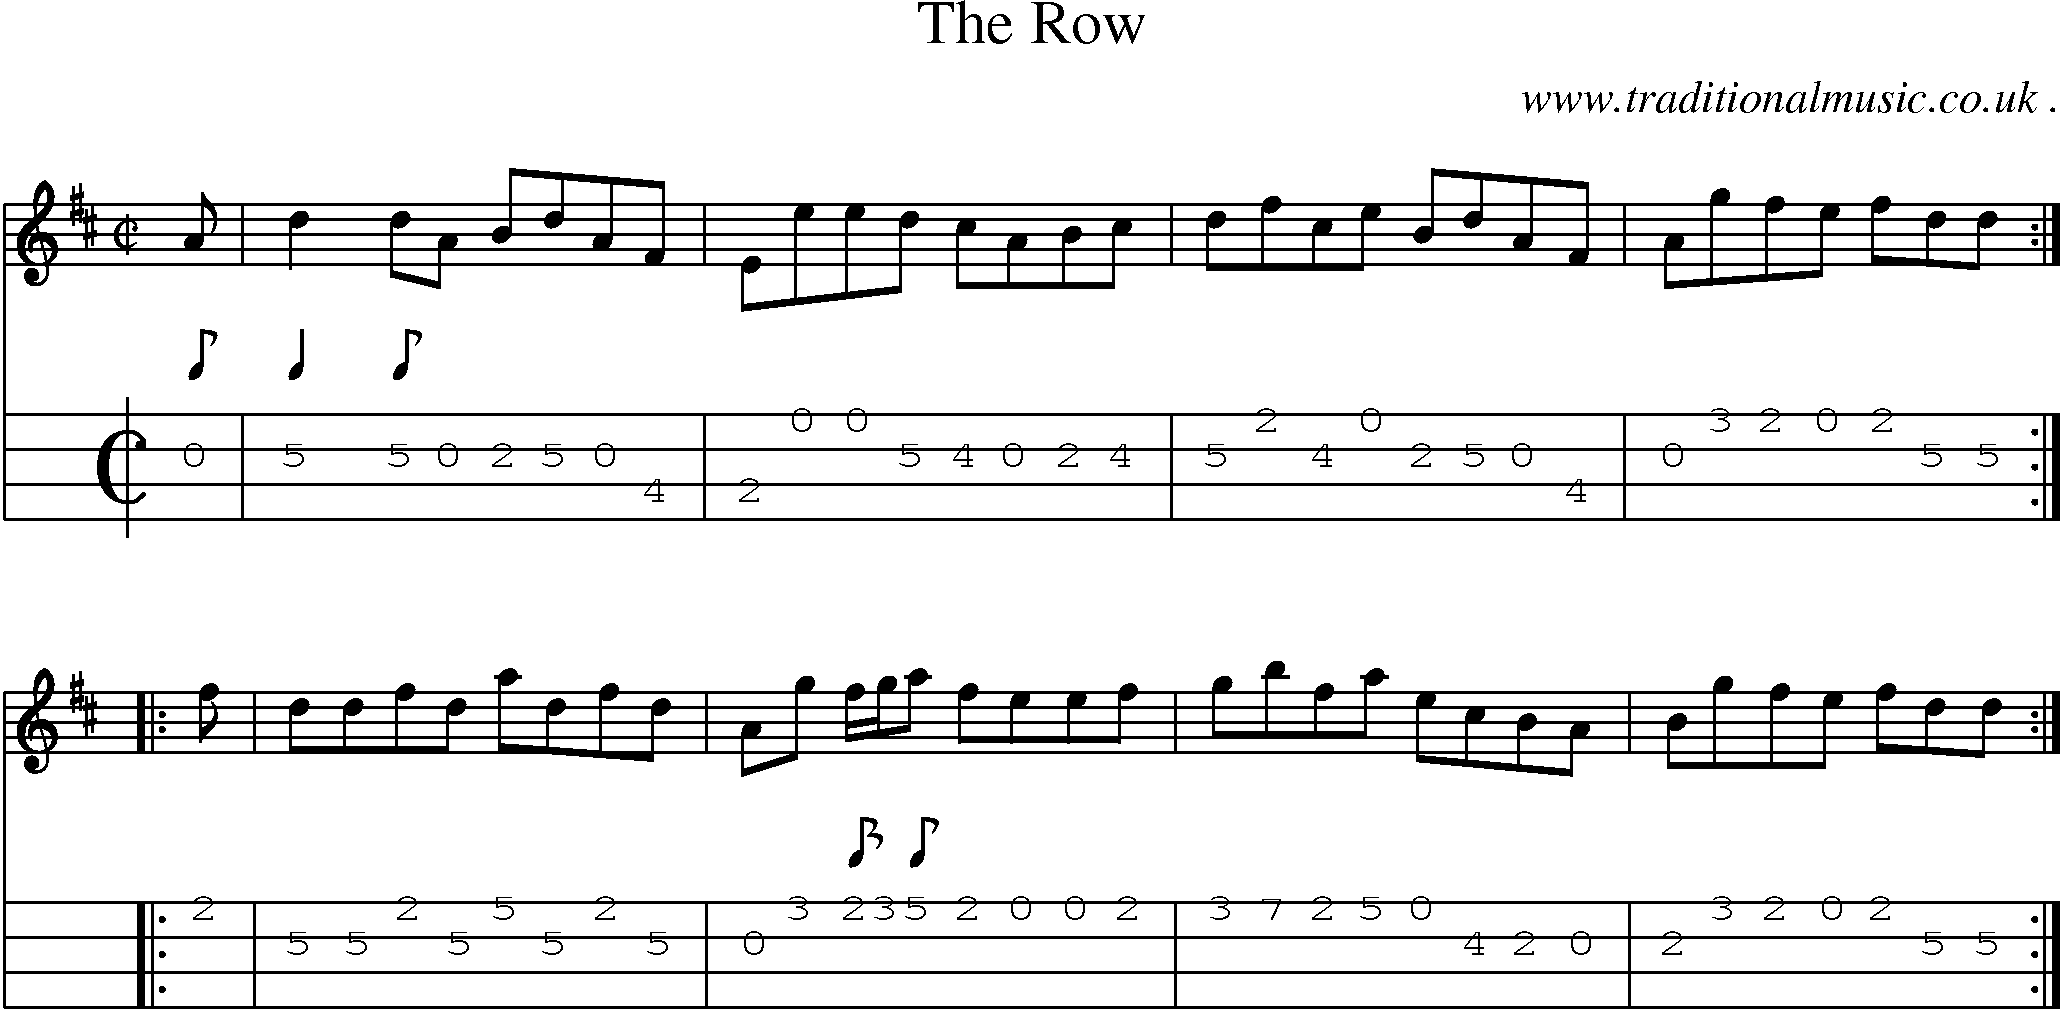 Sheet-music  score, Chords and Mandolin Tabs for The Row